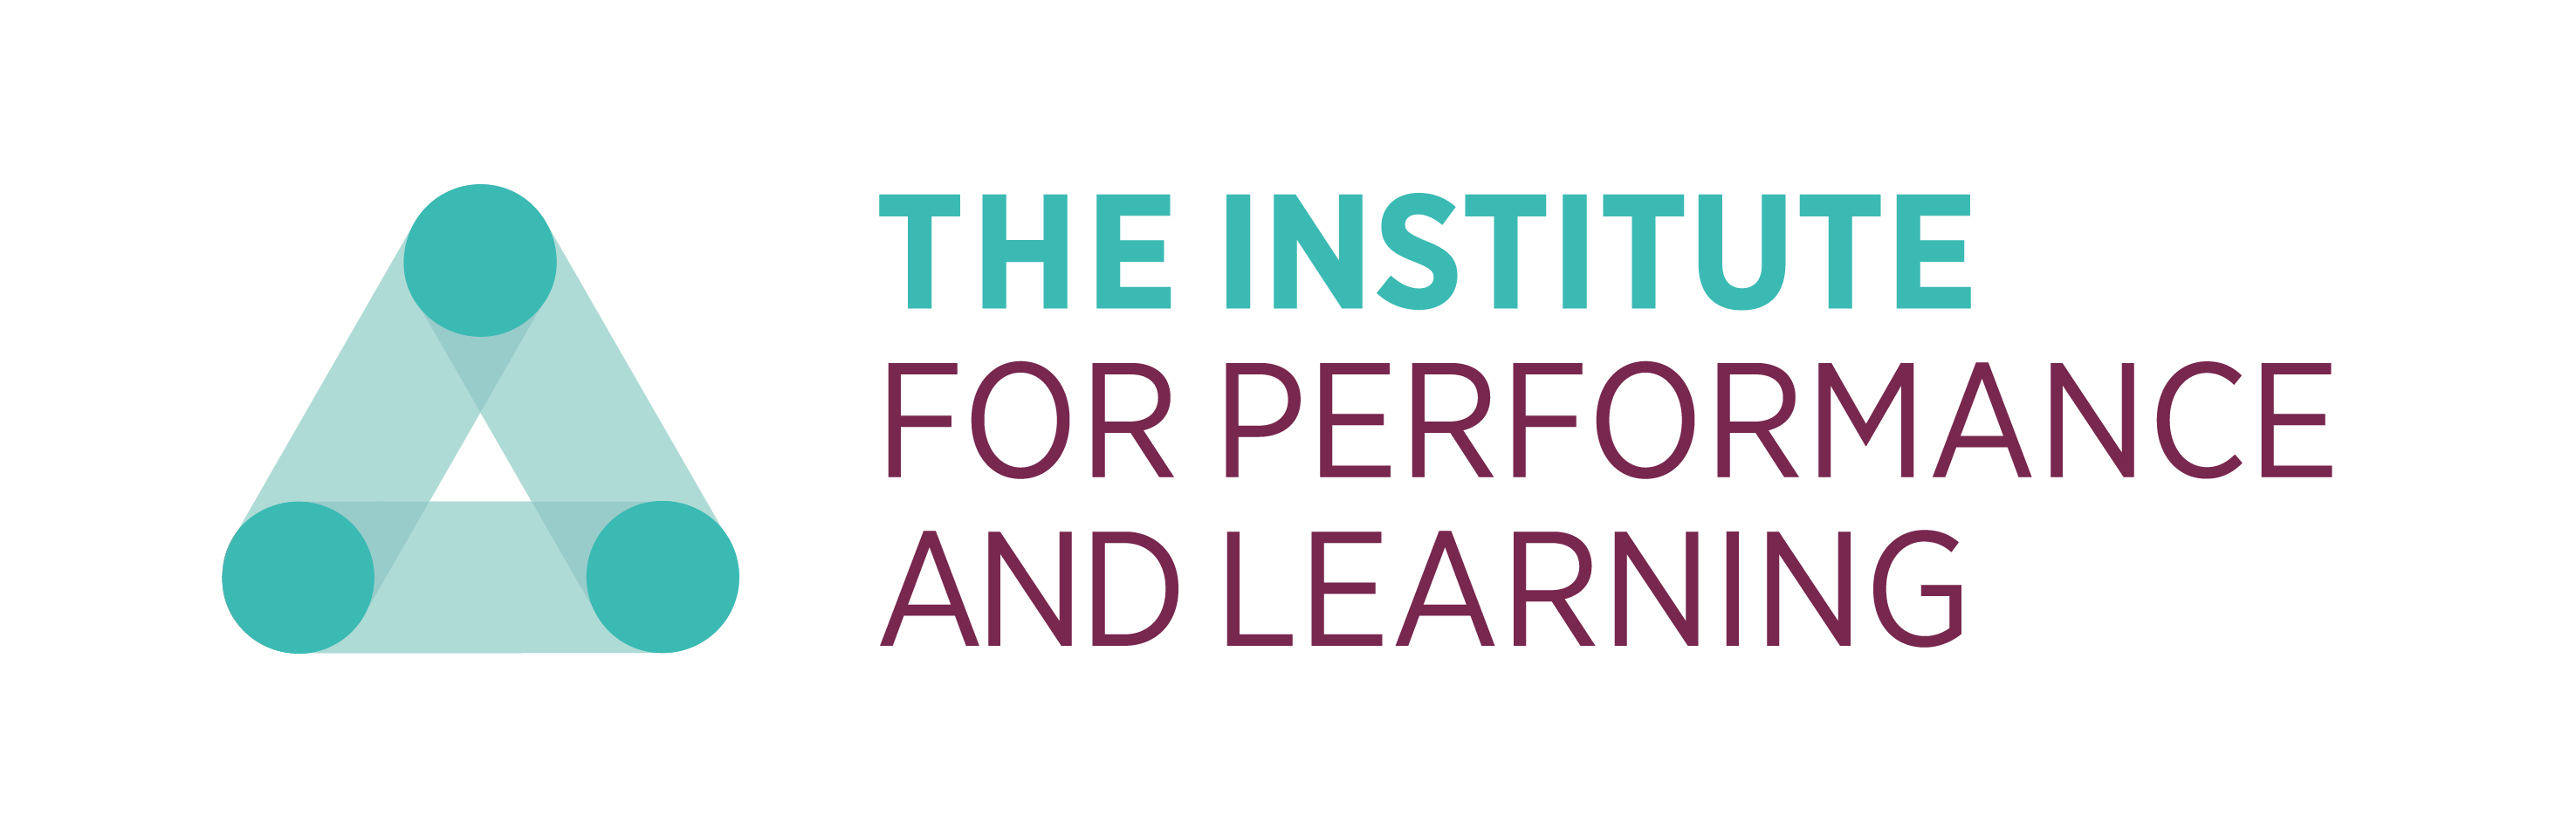 Member - The Institute for Performance and Learning